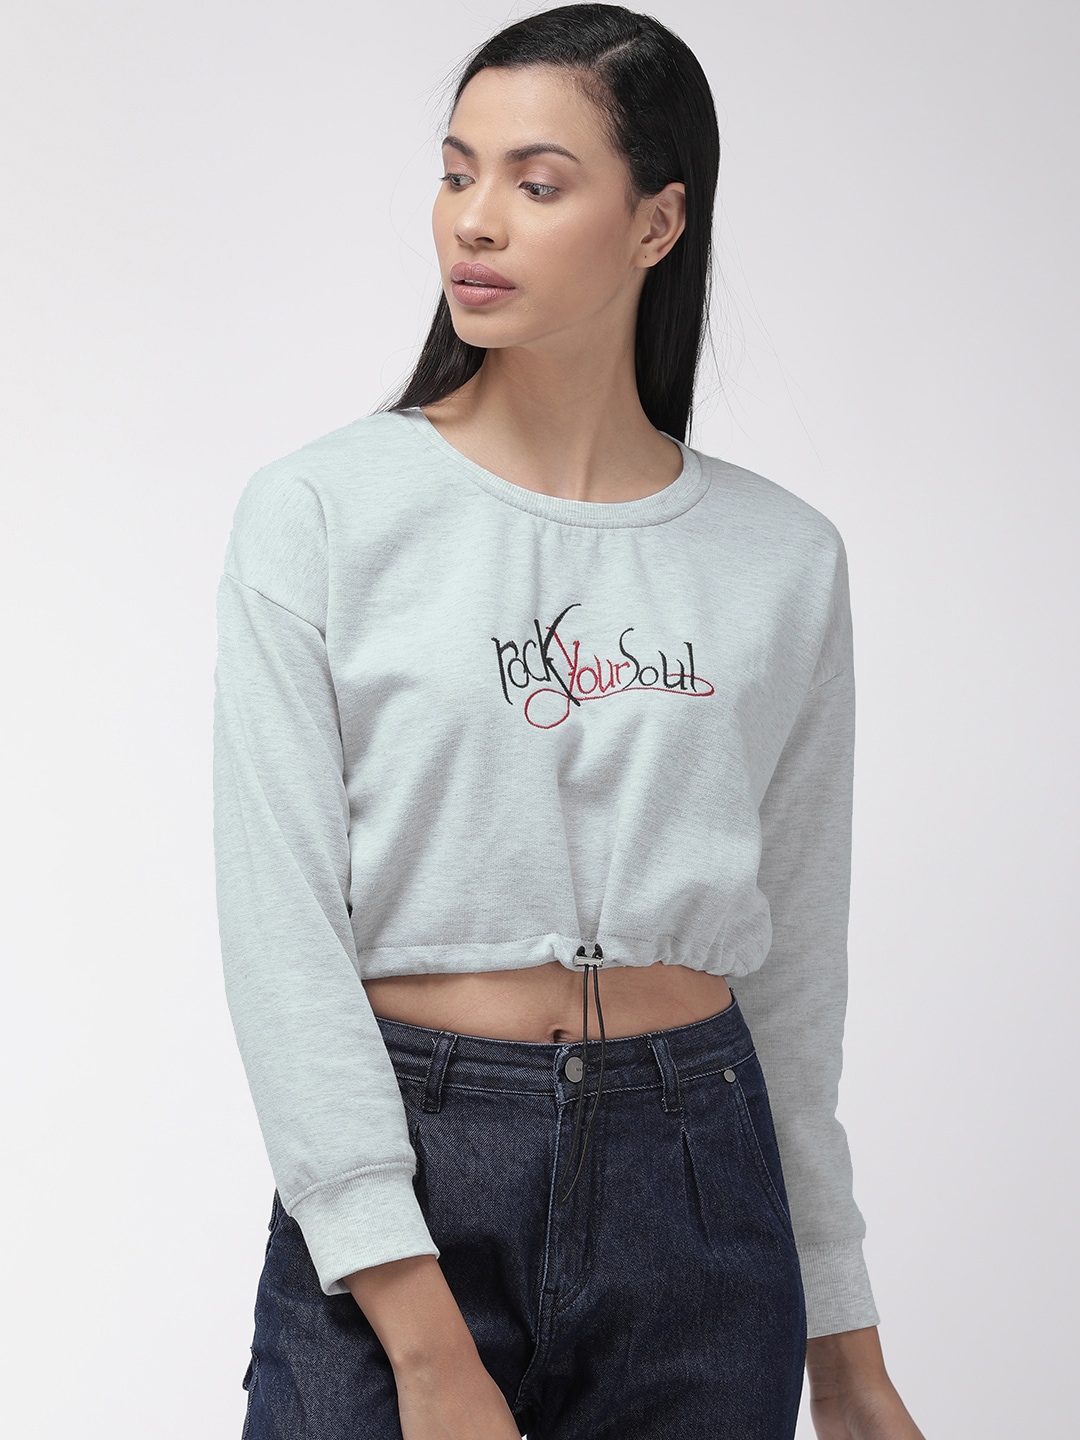 Fort Collins Women Grey Melange Embroidered Cropped Sweatshirt Price in India